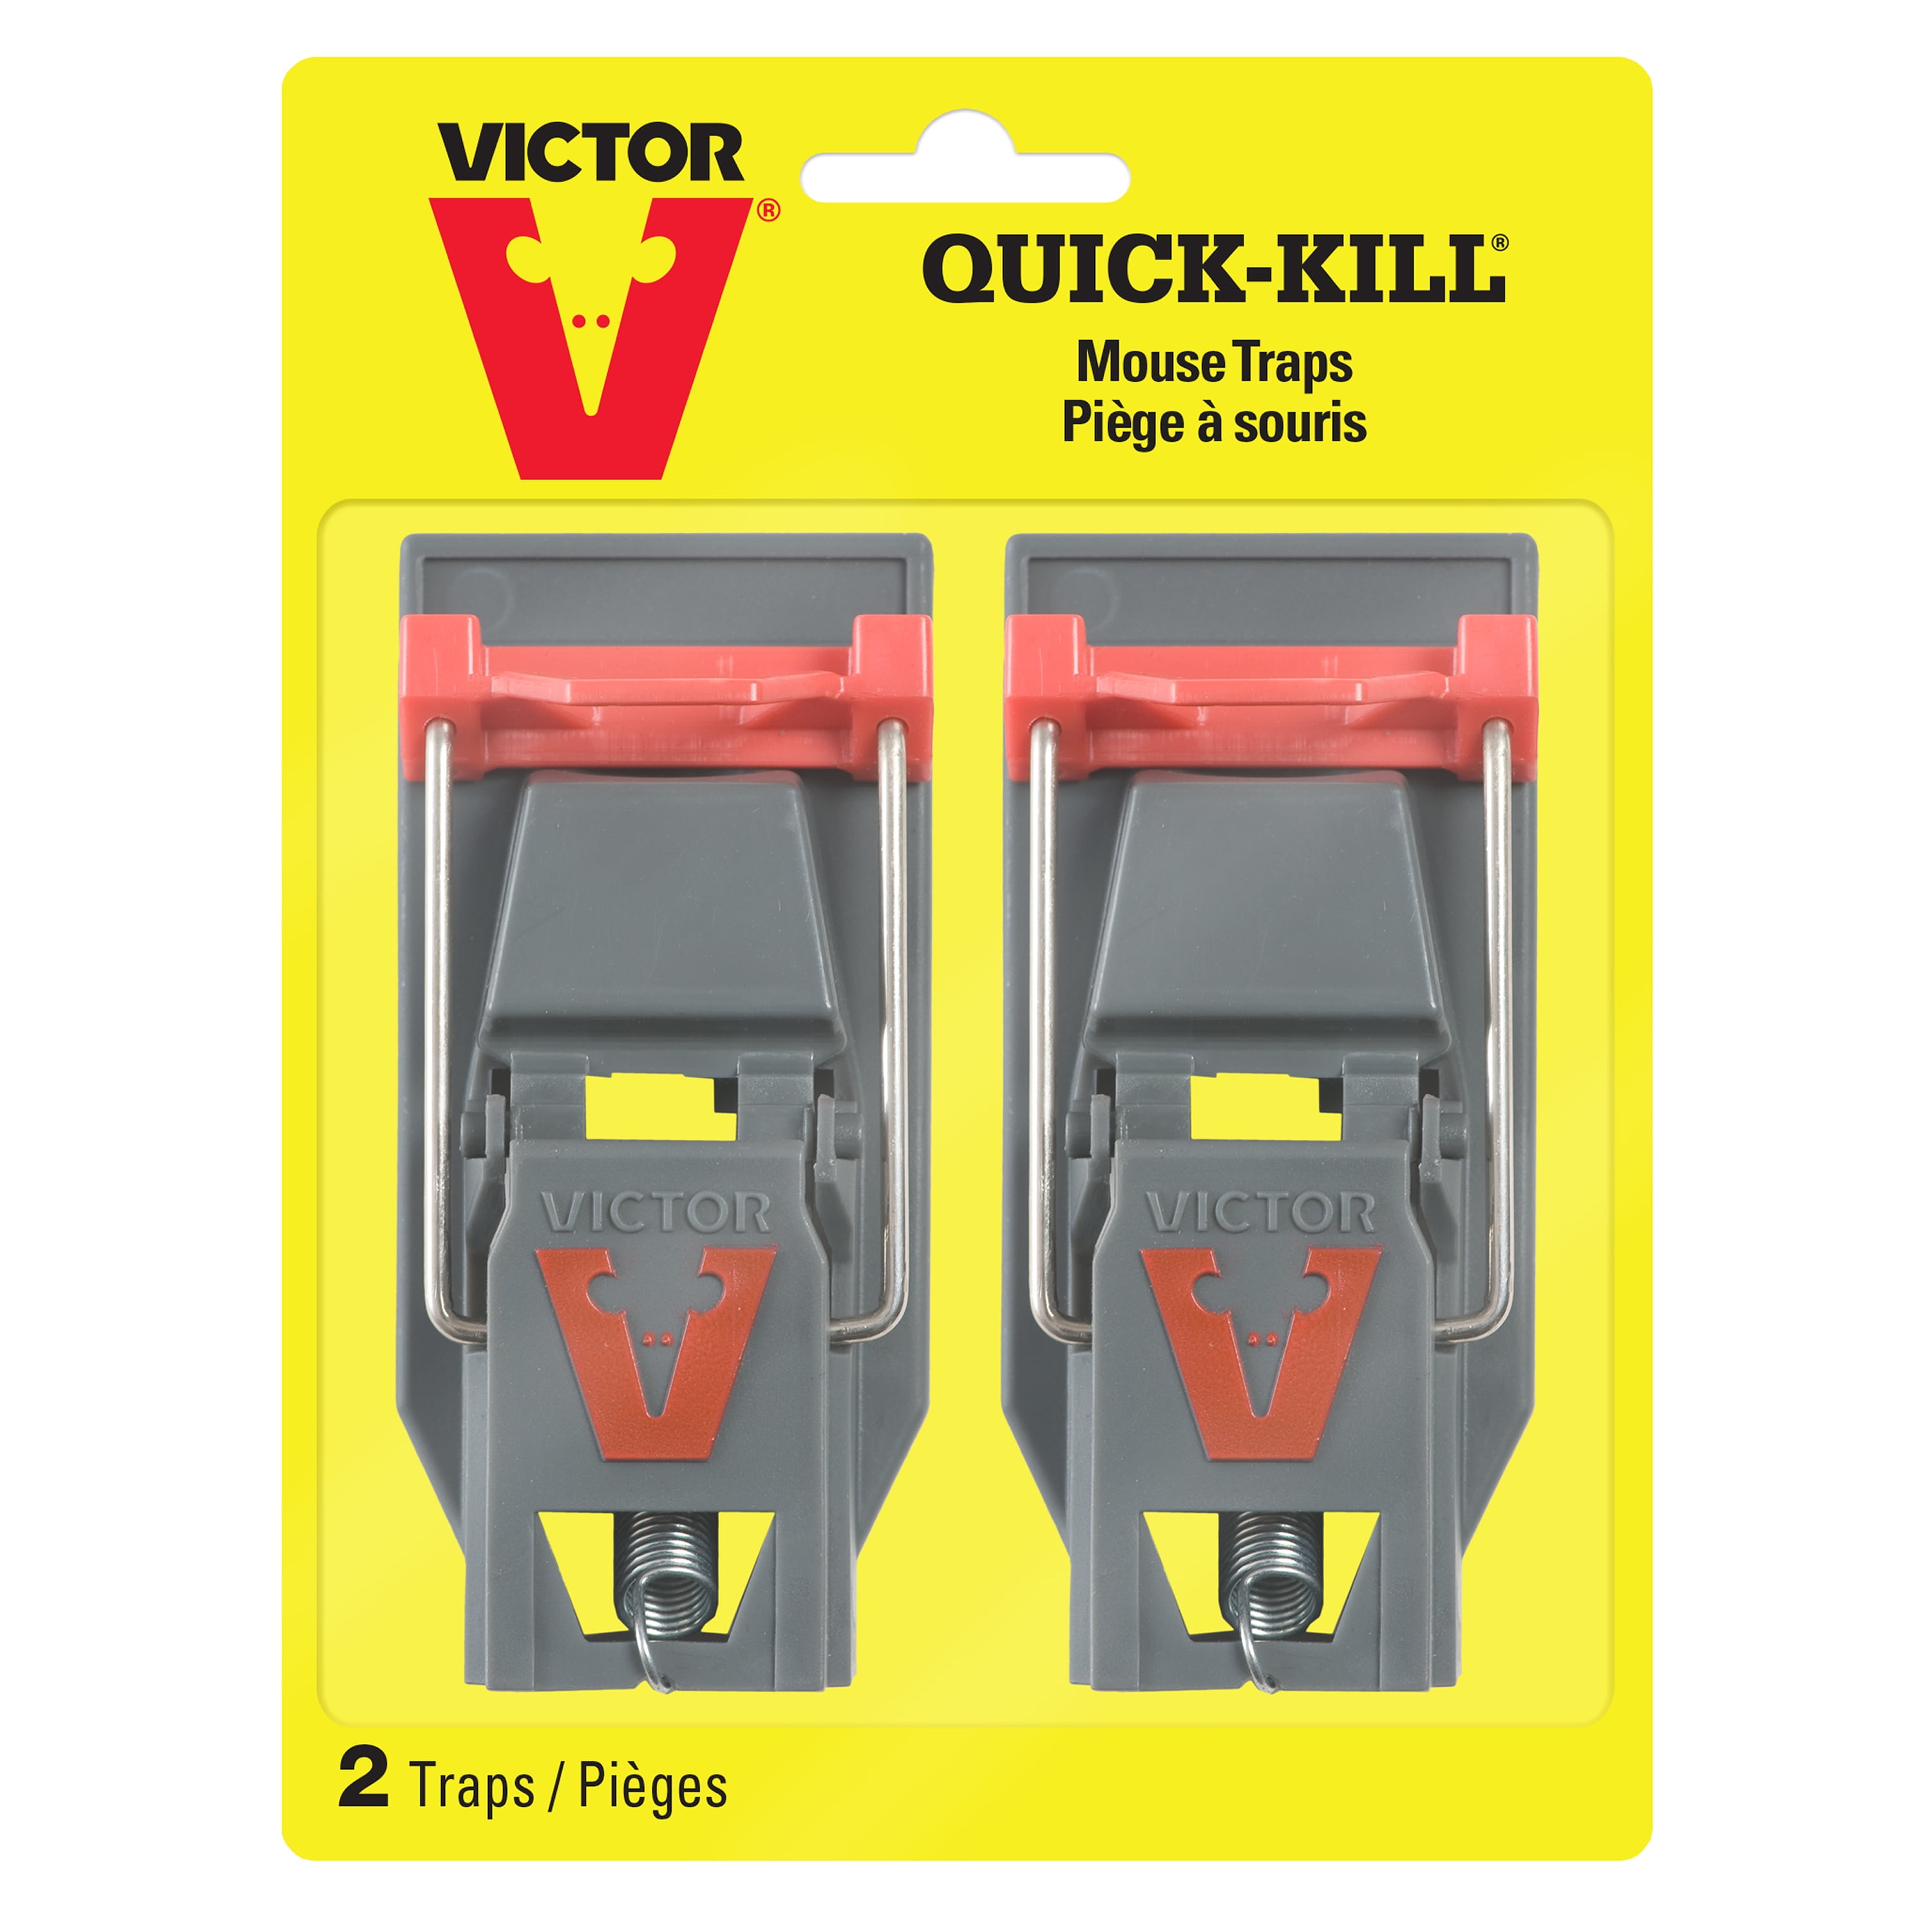 VICTOR Quick Kill Mouse Traps 2 I Packm140 for sale online 